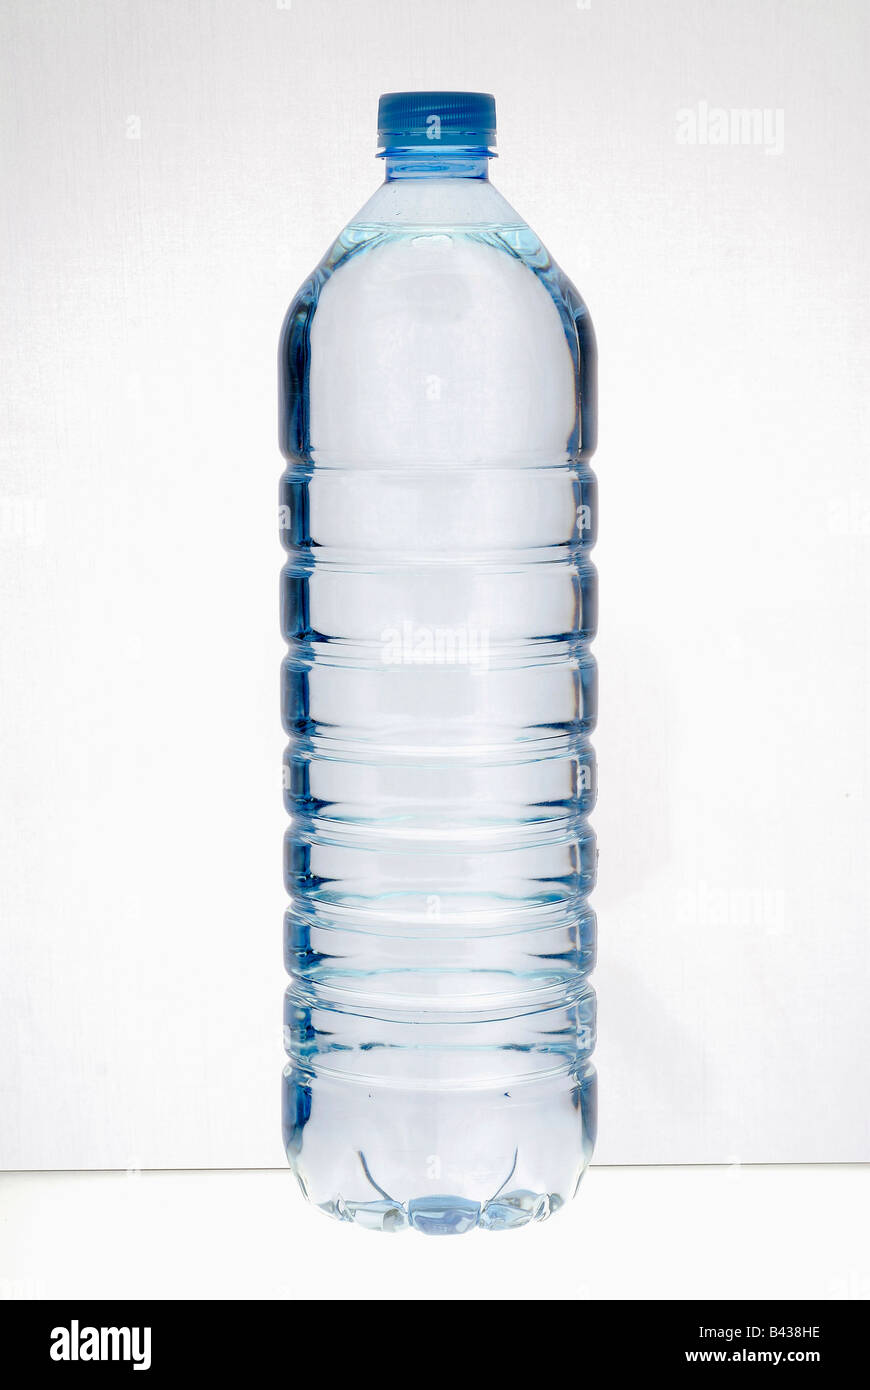 Bottle of mineral water Stock Photo